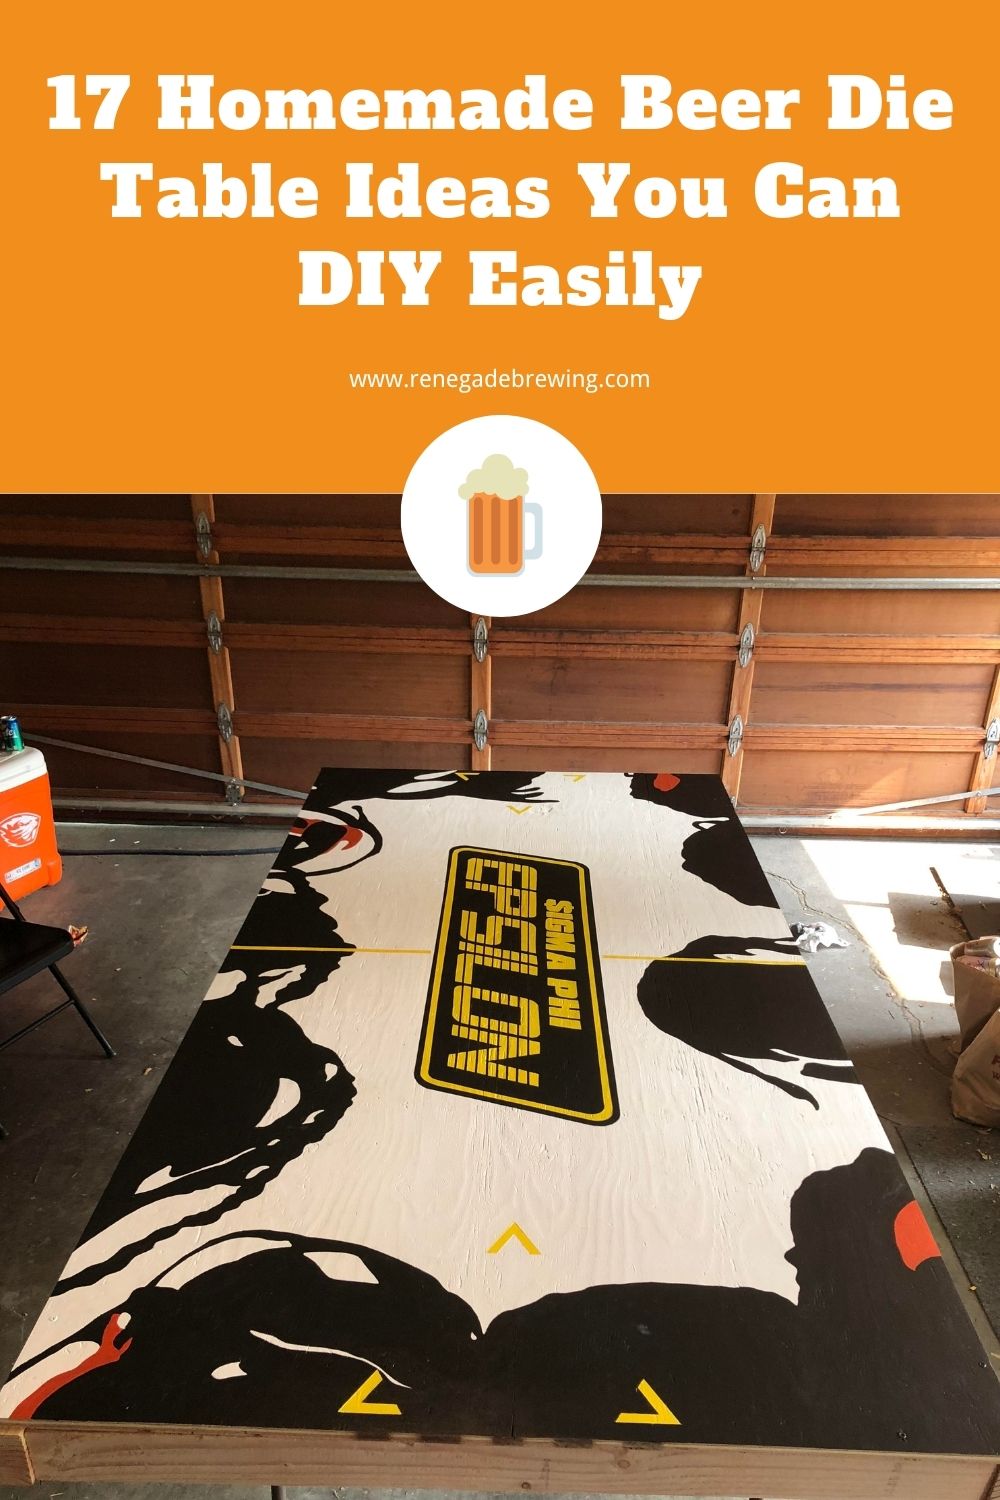 17 DIY Beer Molding Table Ideas You Can Make Easily 2